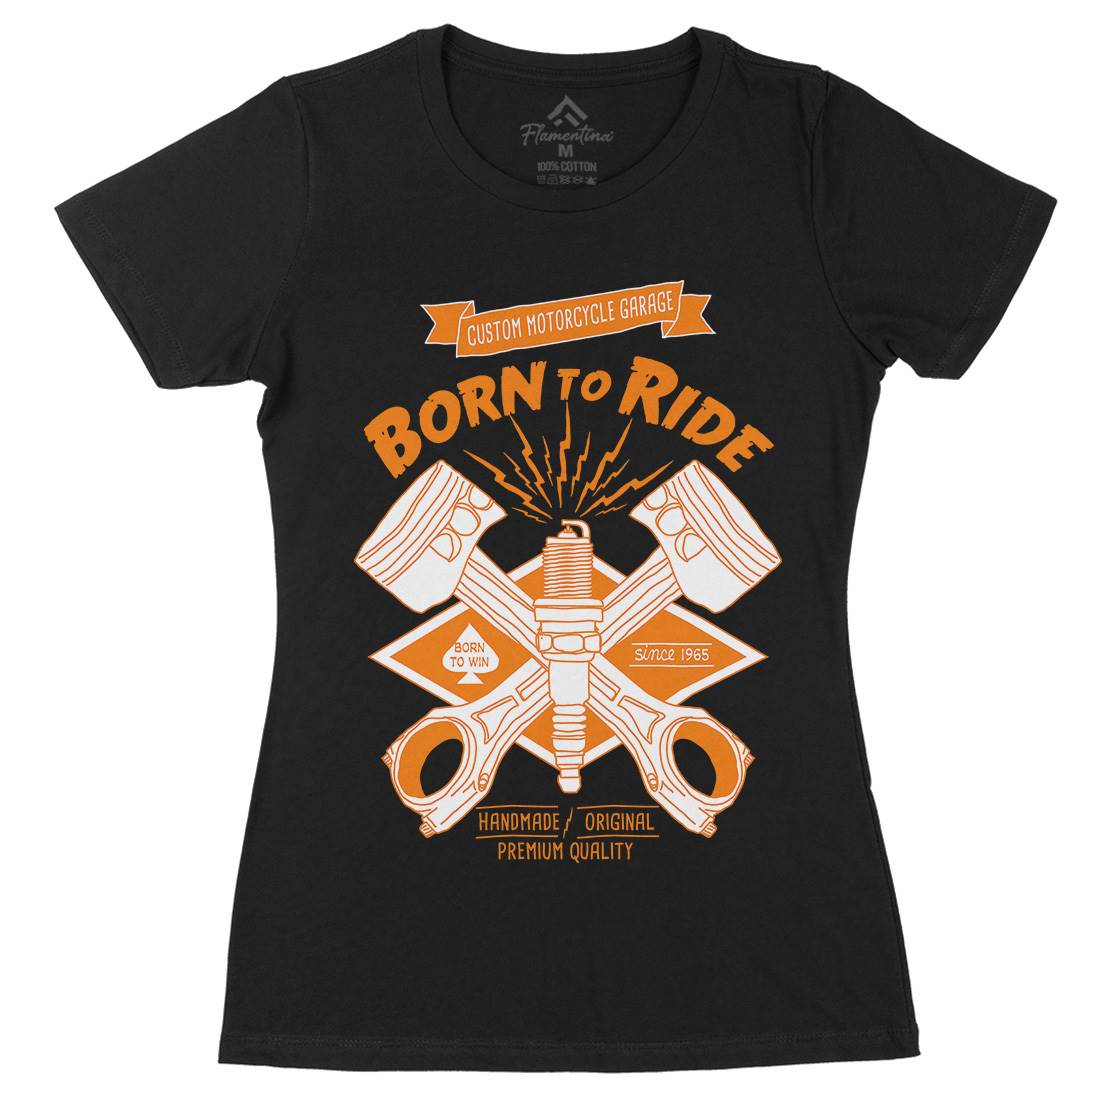 Born To Ride Womens Organic Crew Neck T-Shirt Motorcycles A990